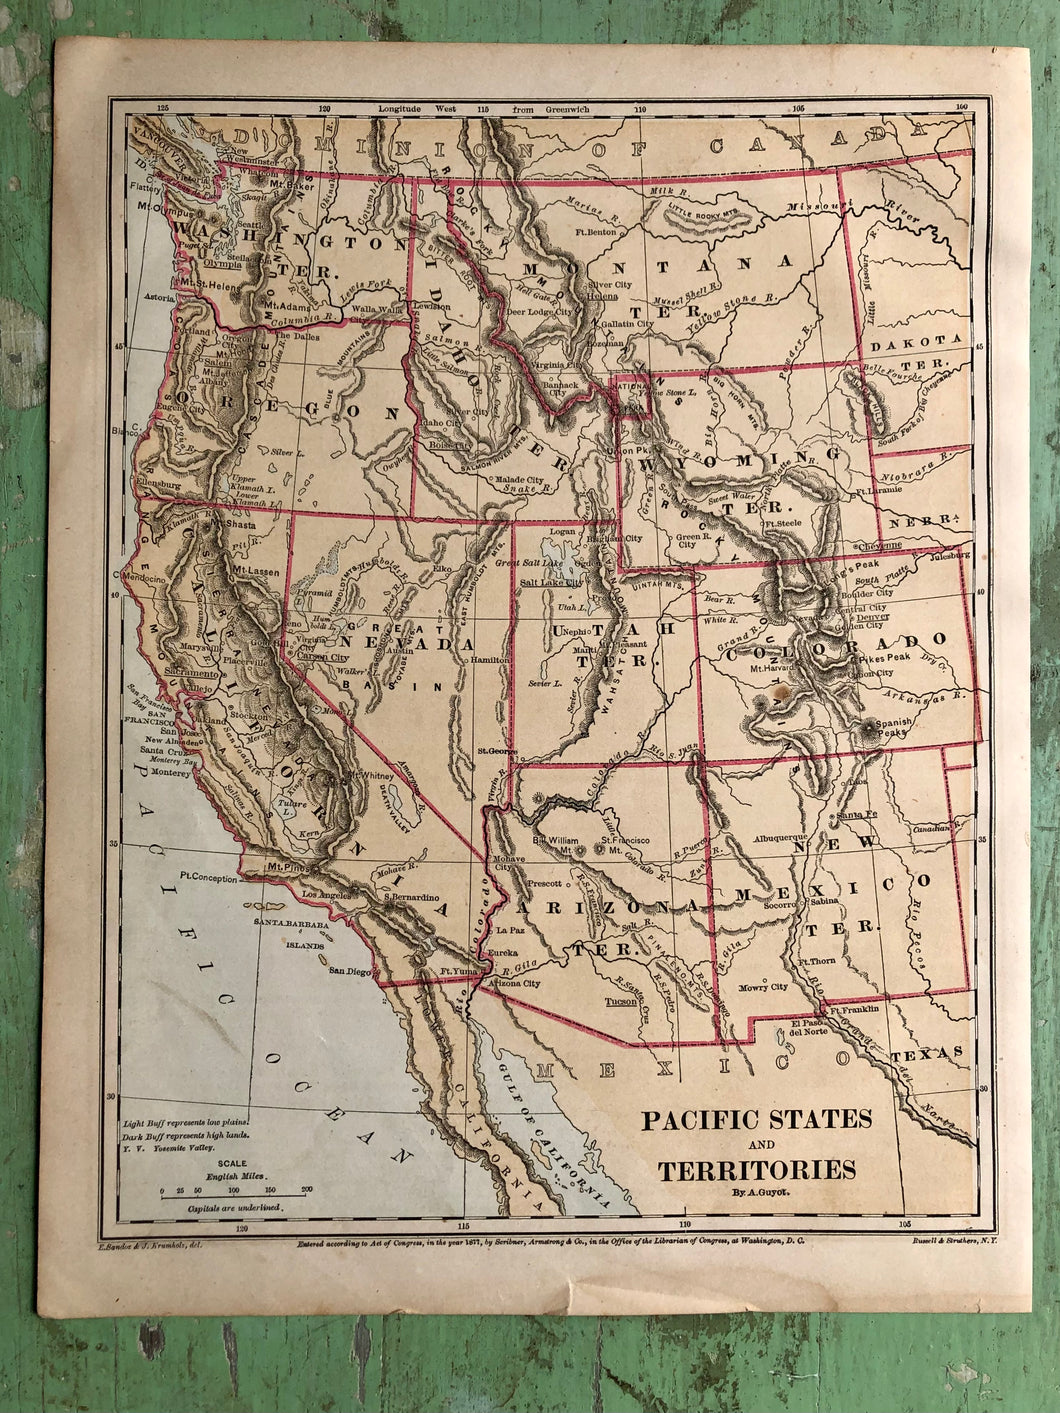 Map of Pacific States and Territories from Guyot's New Intermediate Geography